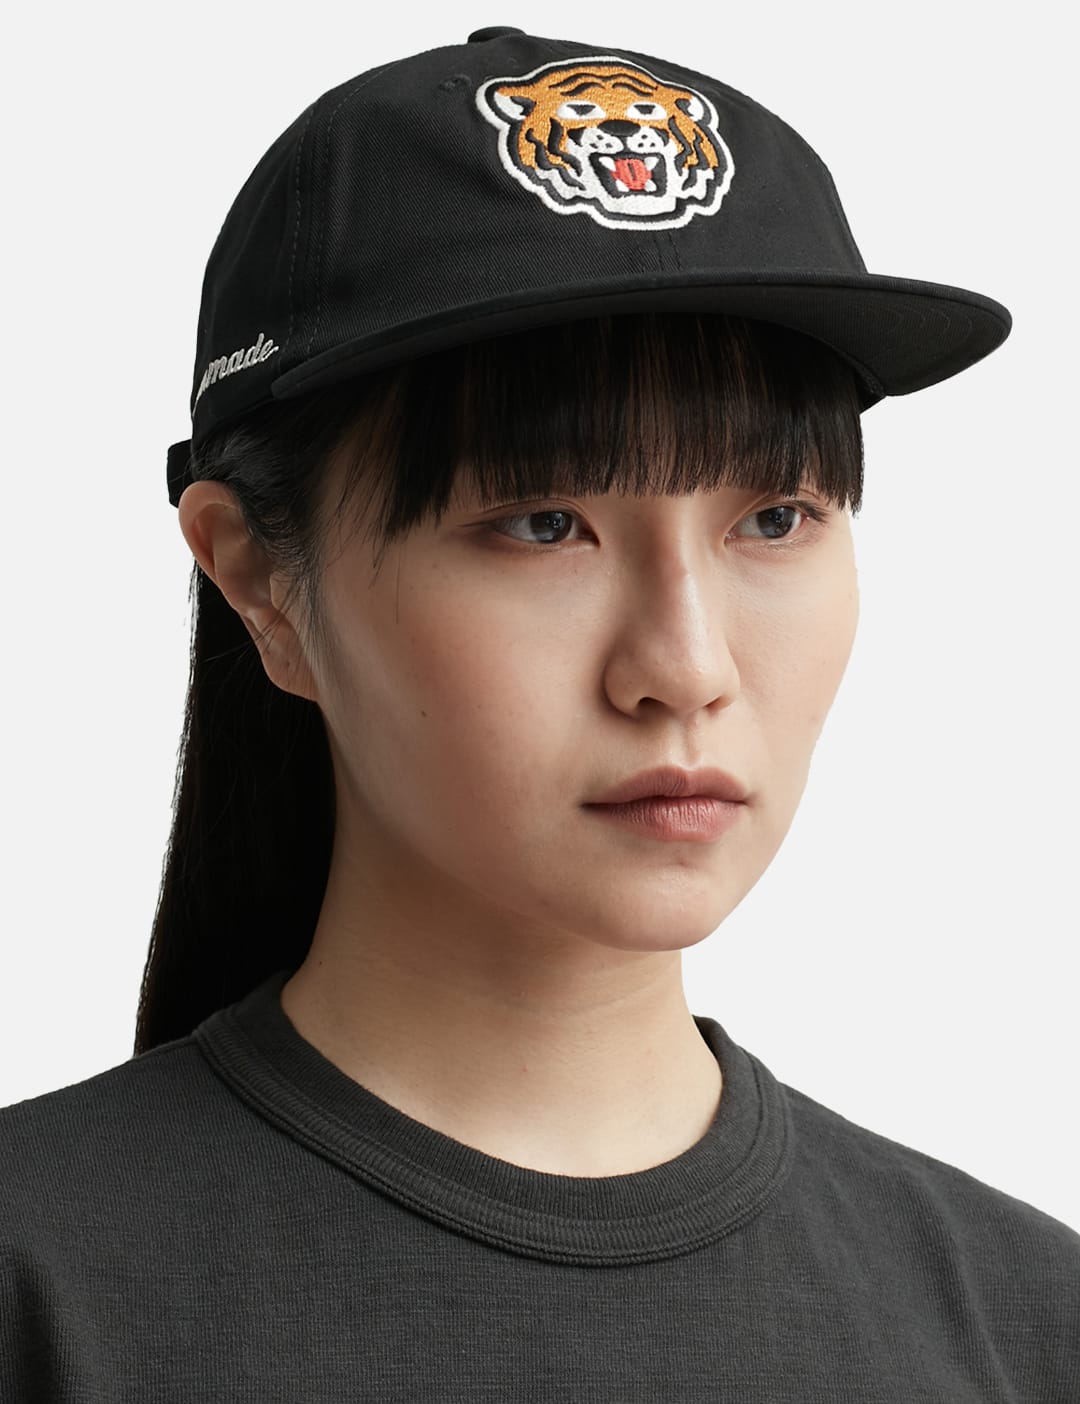 Human Made - 6 PANEL TWILL CAP #1 | HBX - Globally Curated Fashion